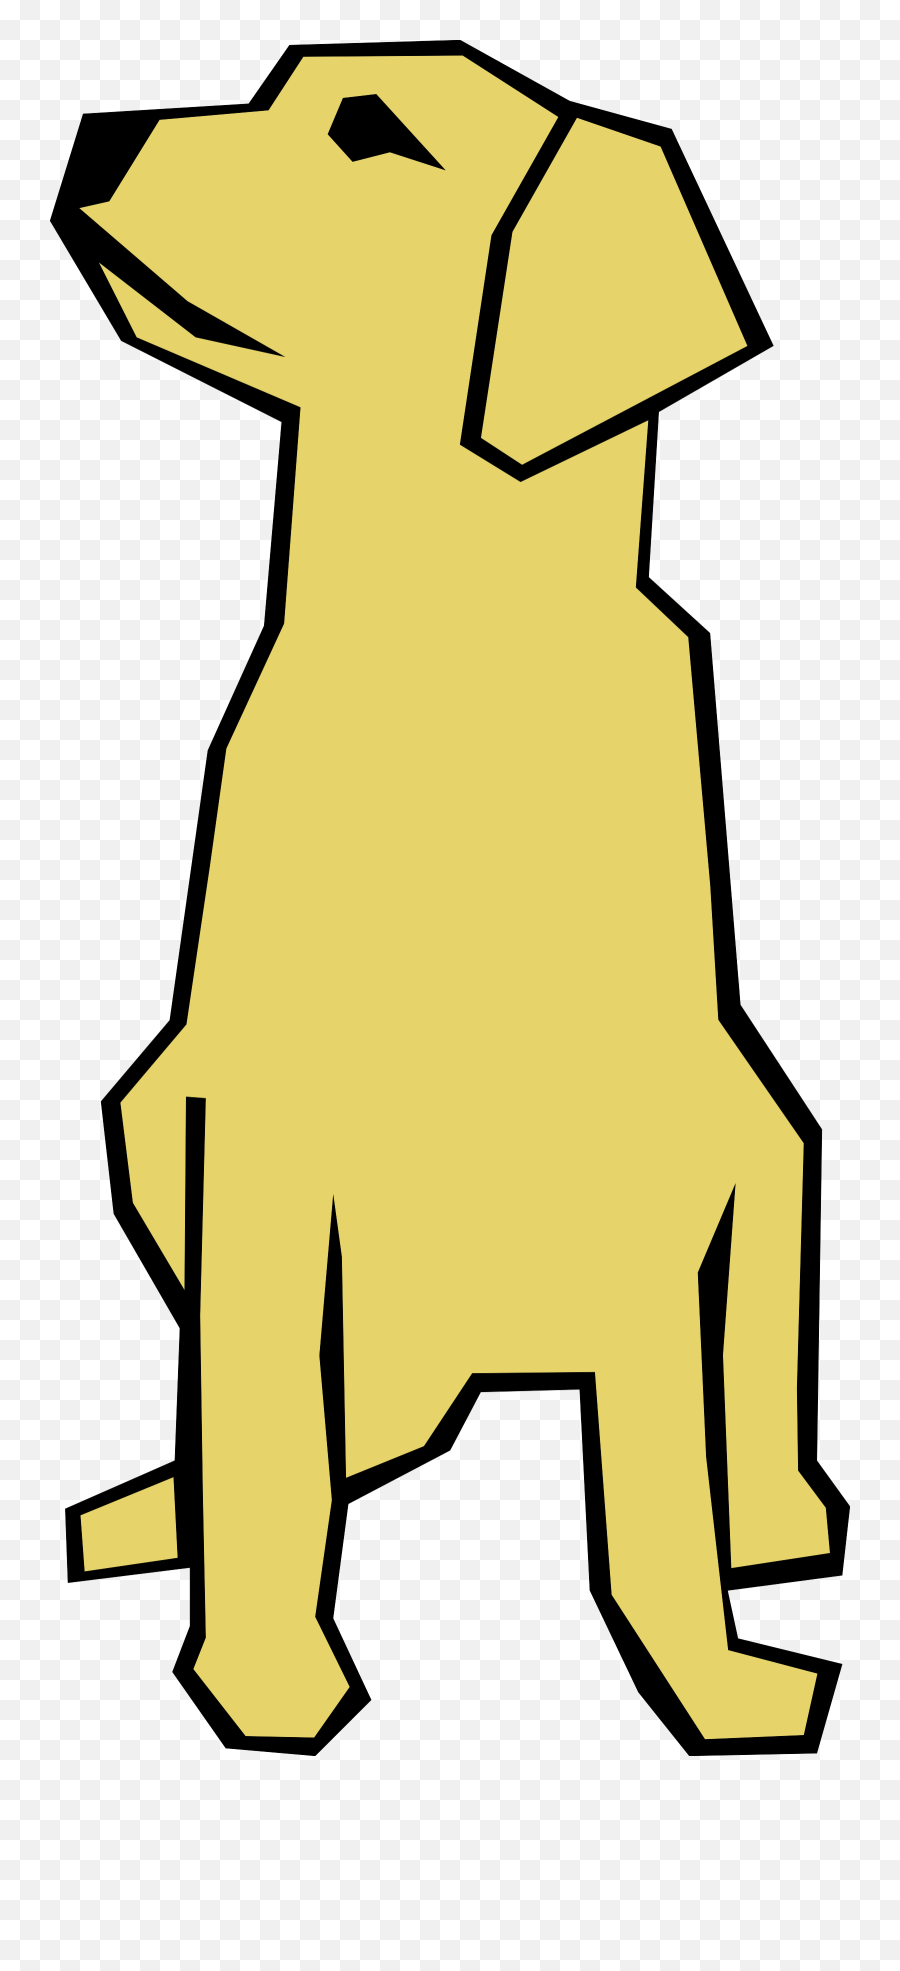 Free Clipart Dog Simple Drawing Geraldg - Drawing Dog With Straight Lines Emoji,Free Clipart Dog